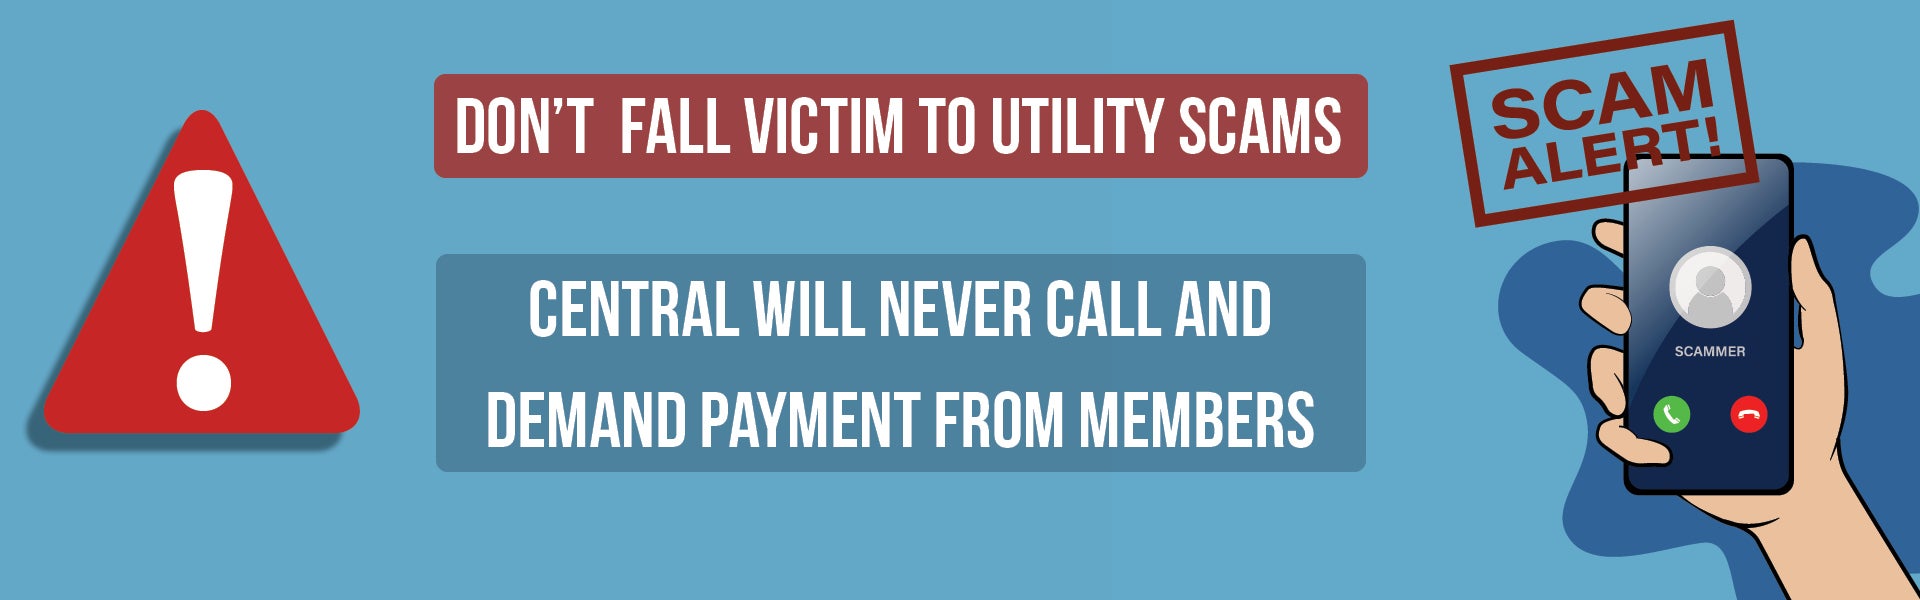 Scam Alert! Don't fall victim to utility scams. Central will never call and demand payment from members!